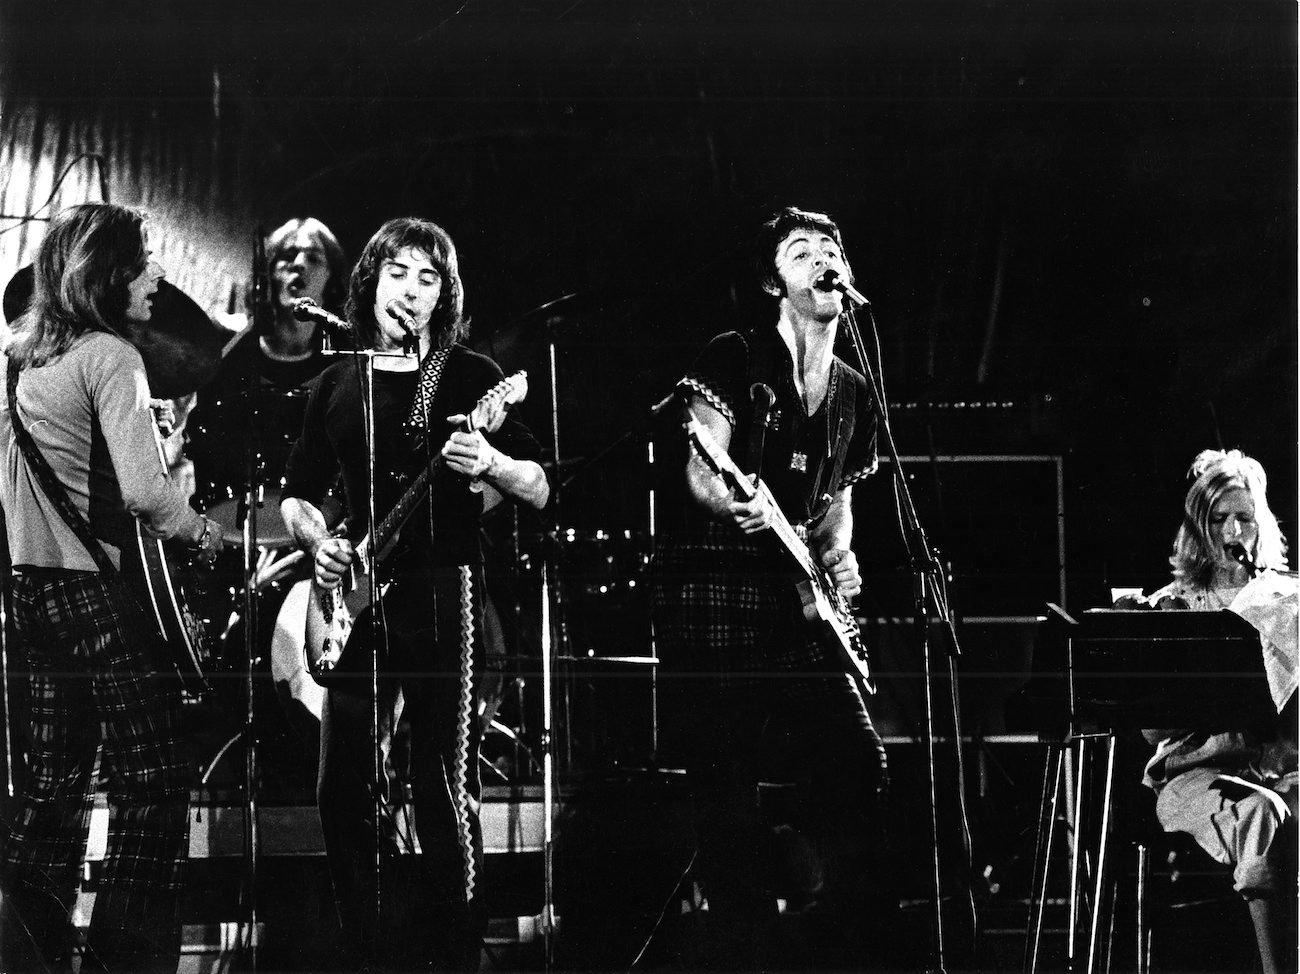 Paul McCartney and Wings performing in France, 1972.